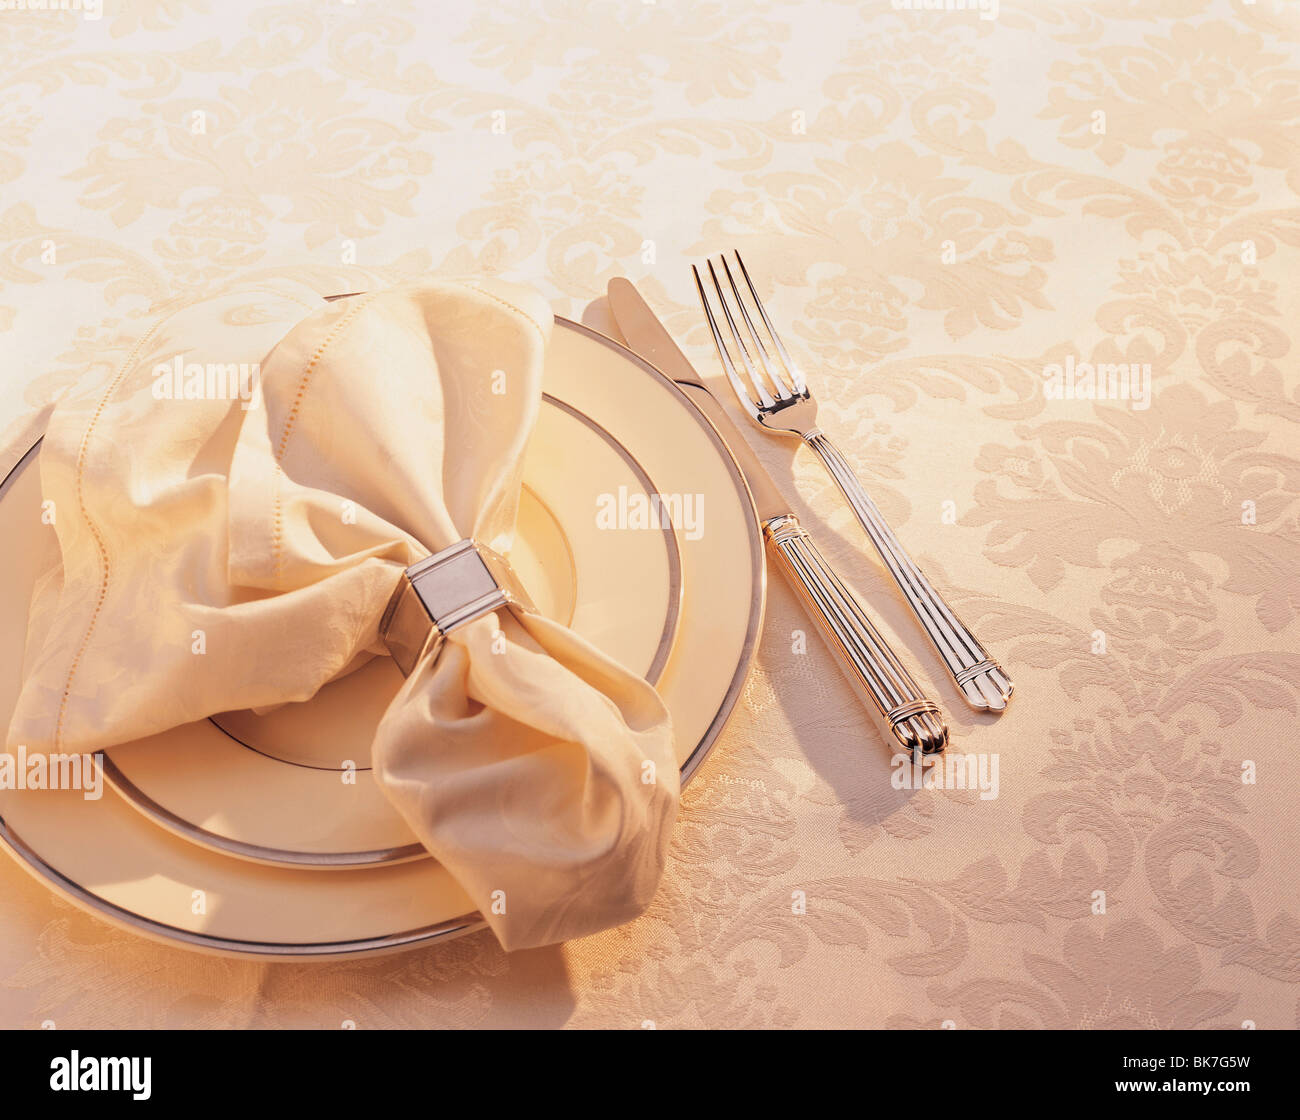 Napkin, plates and flatware on a yellow brocade table cloth with intense light. Stock Photo